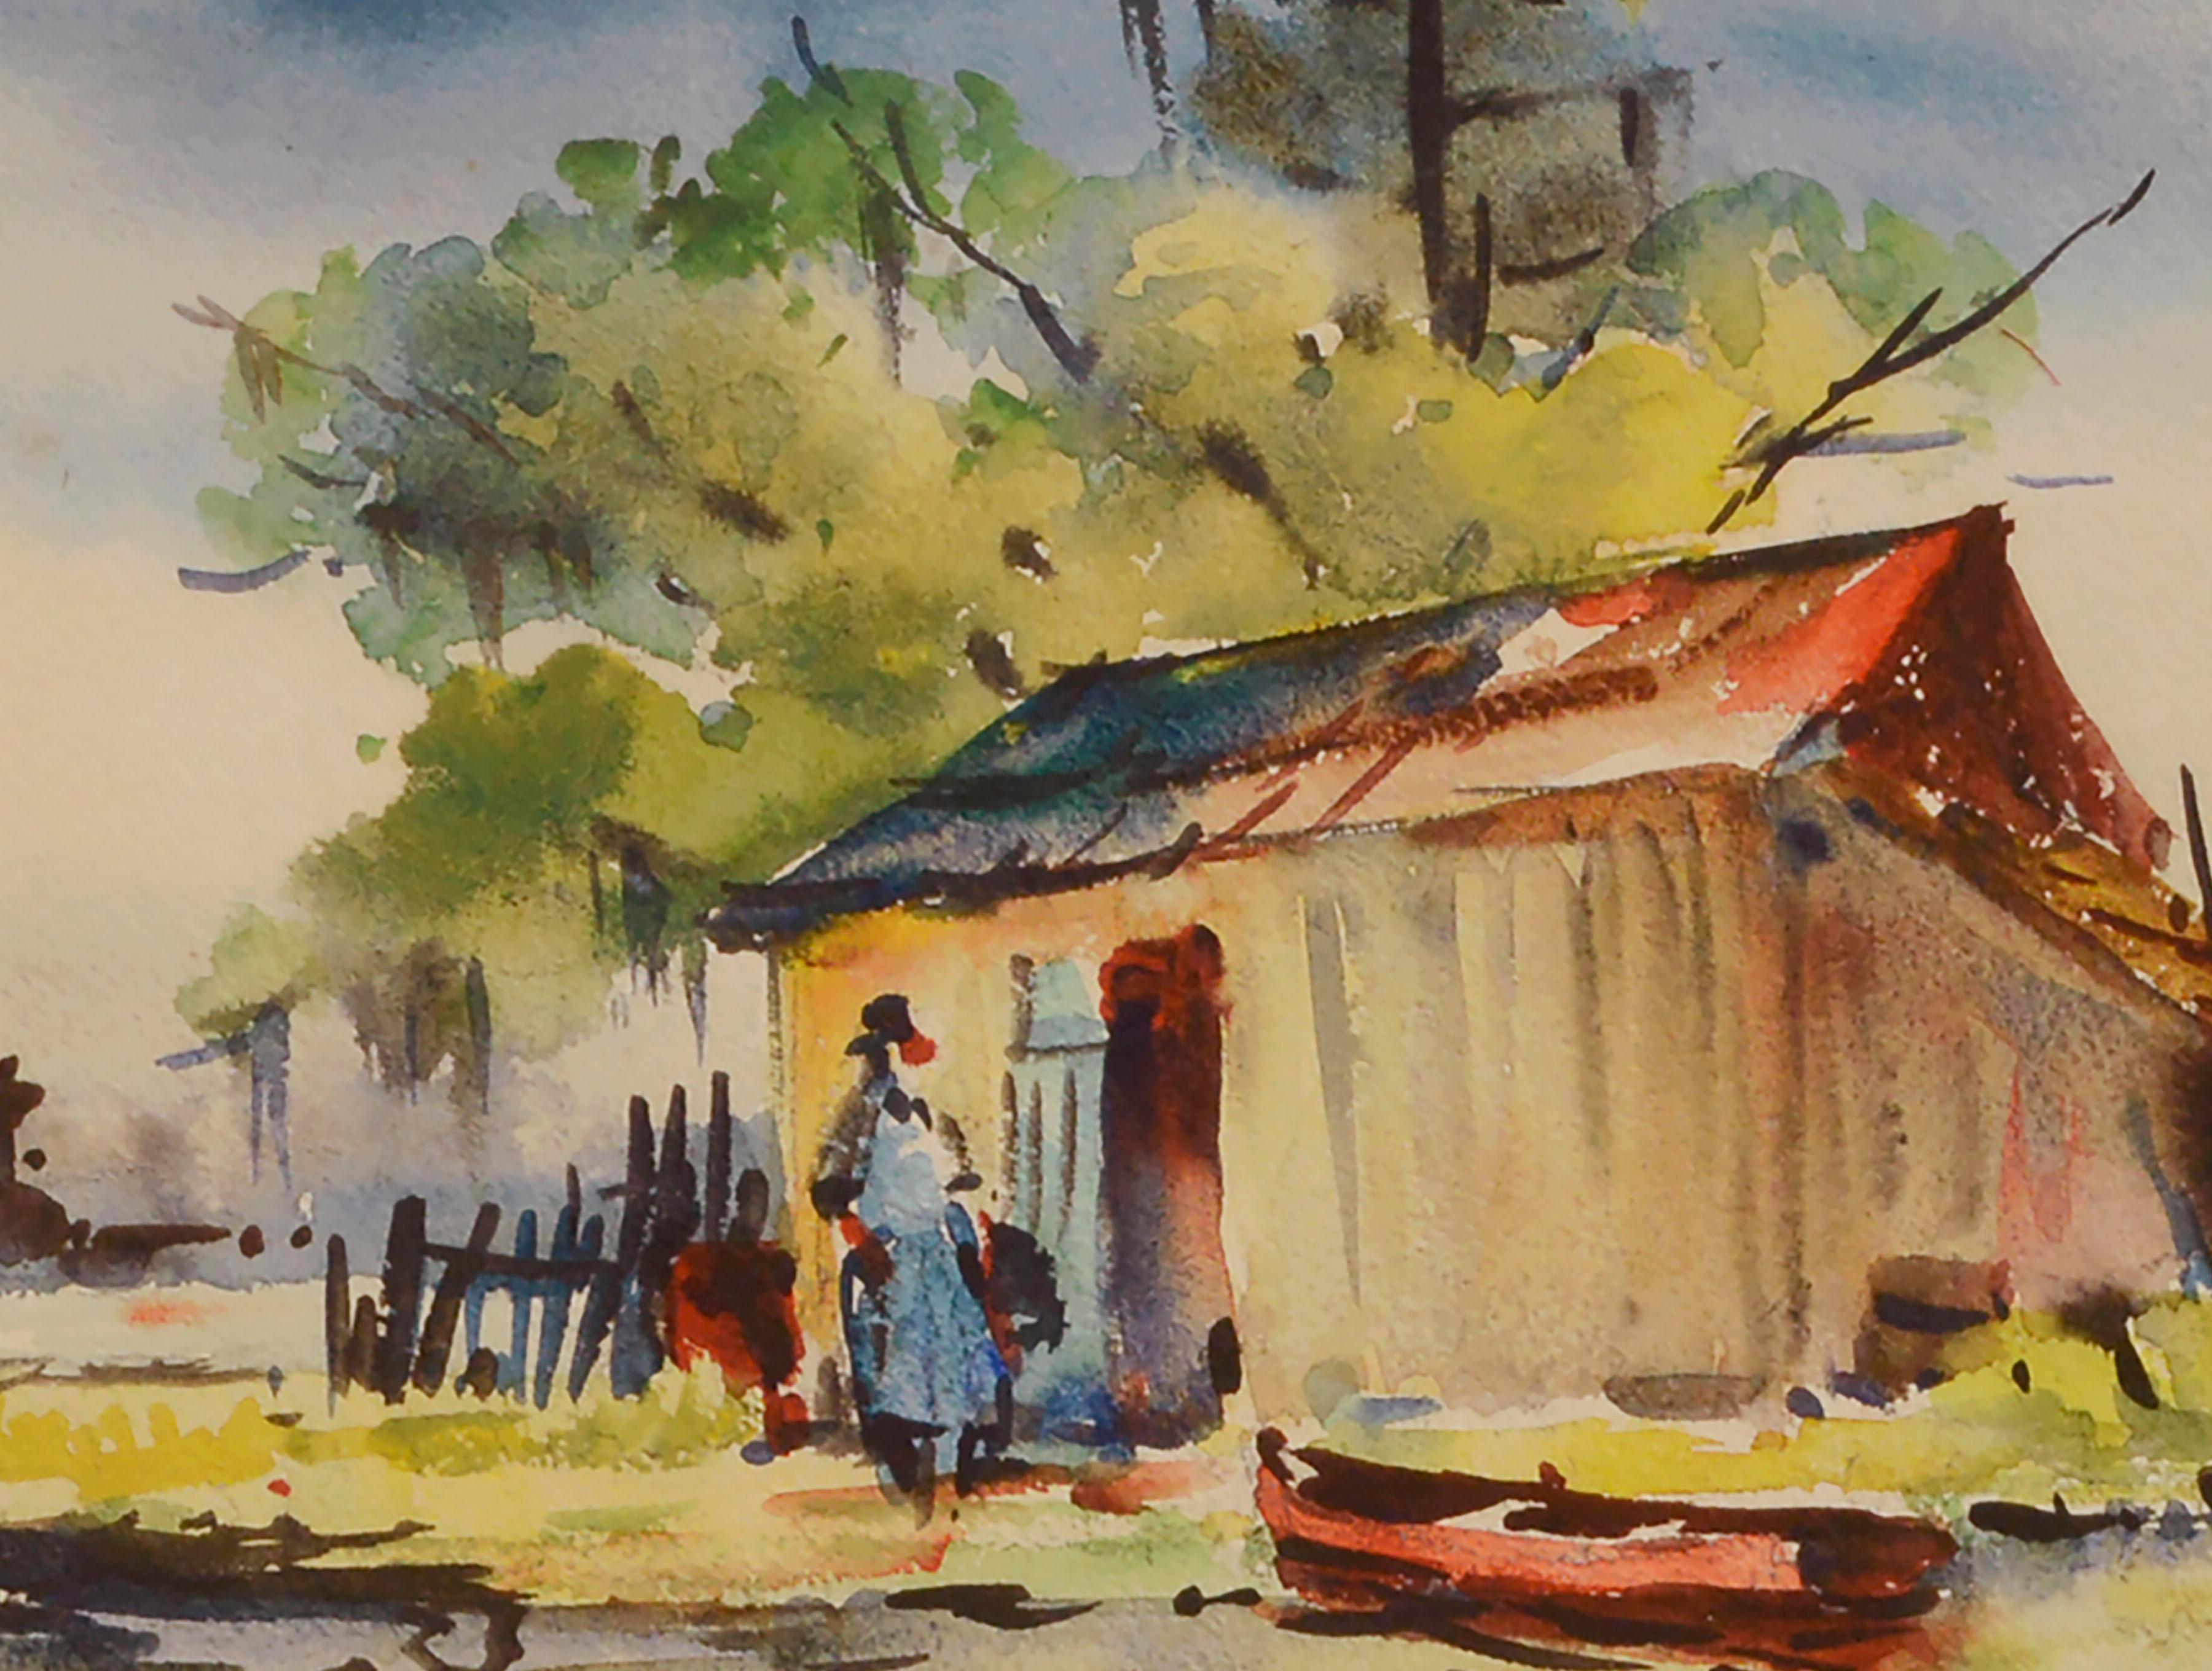 On the Bayou, Figurative Landscape Watercolor by Charles Reinike Sr. 2